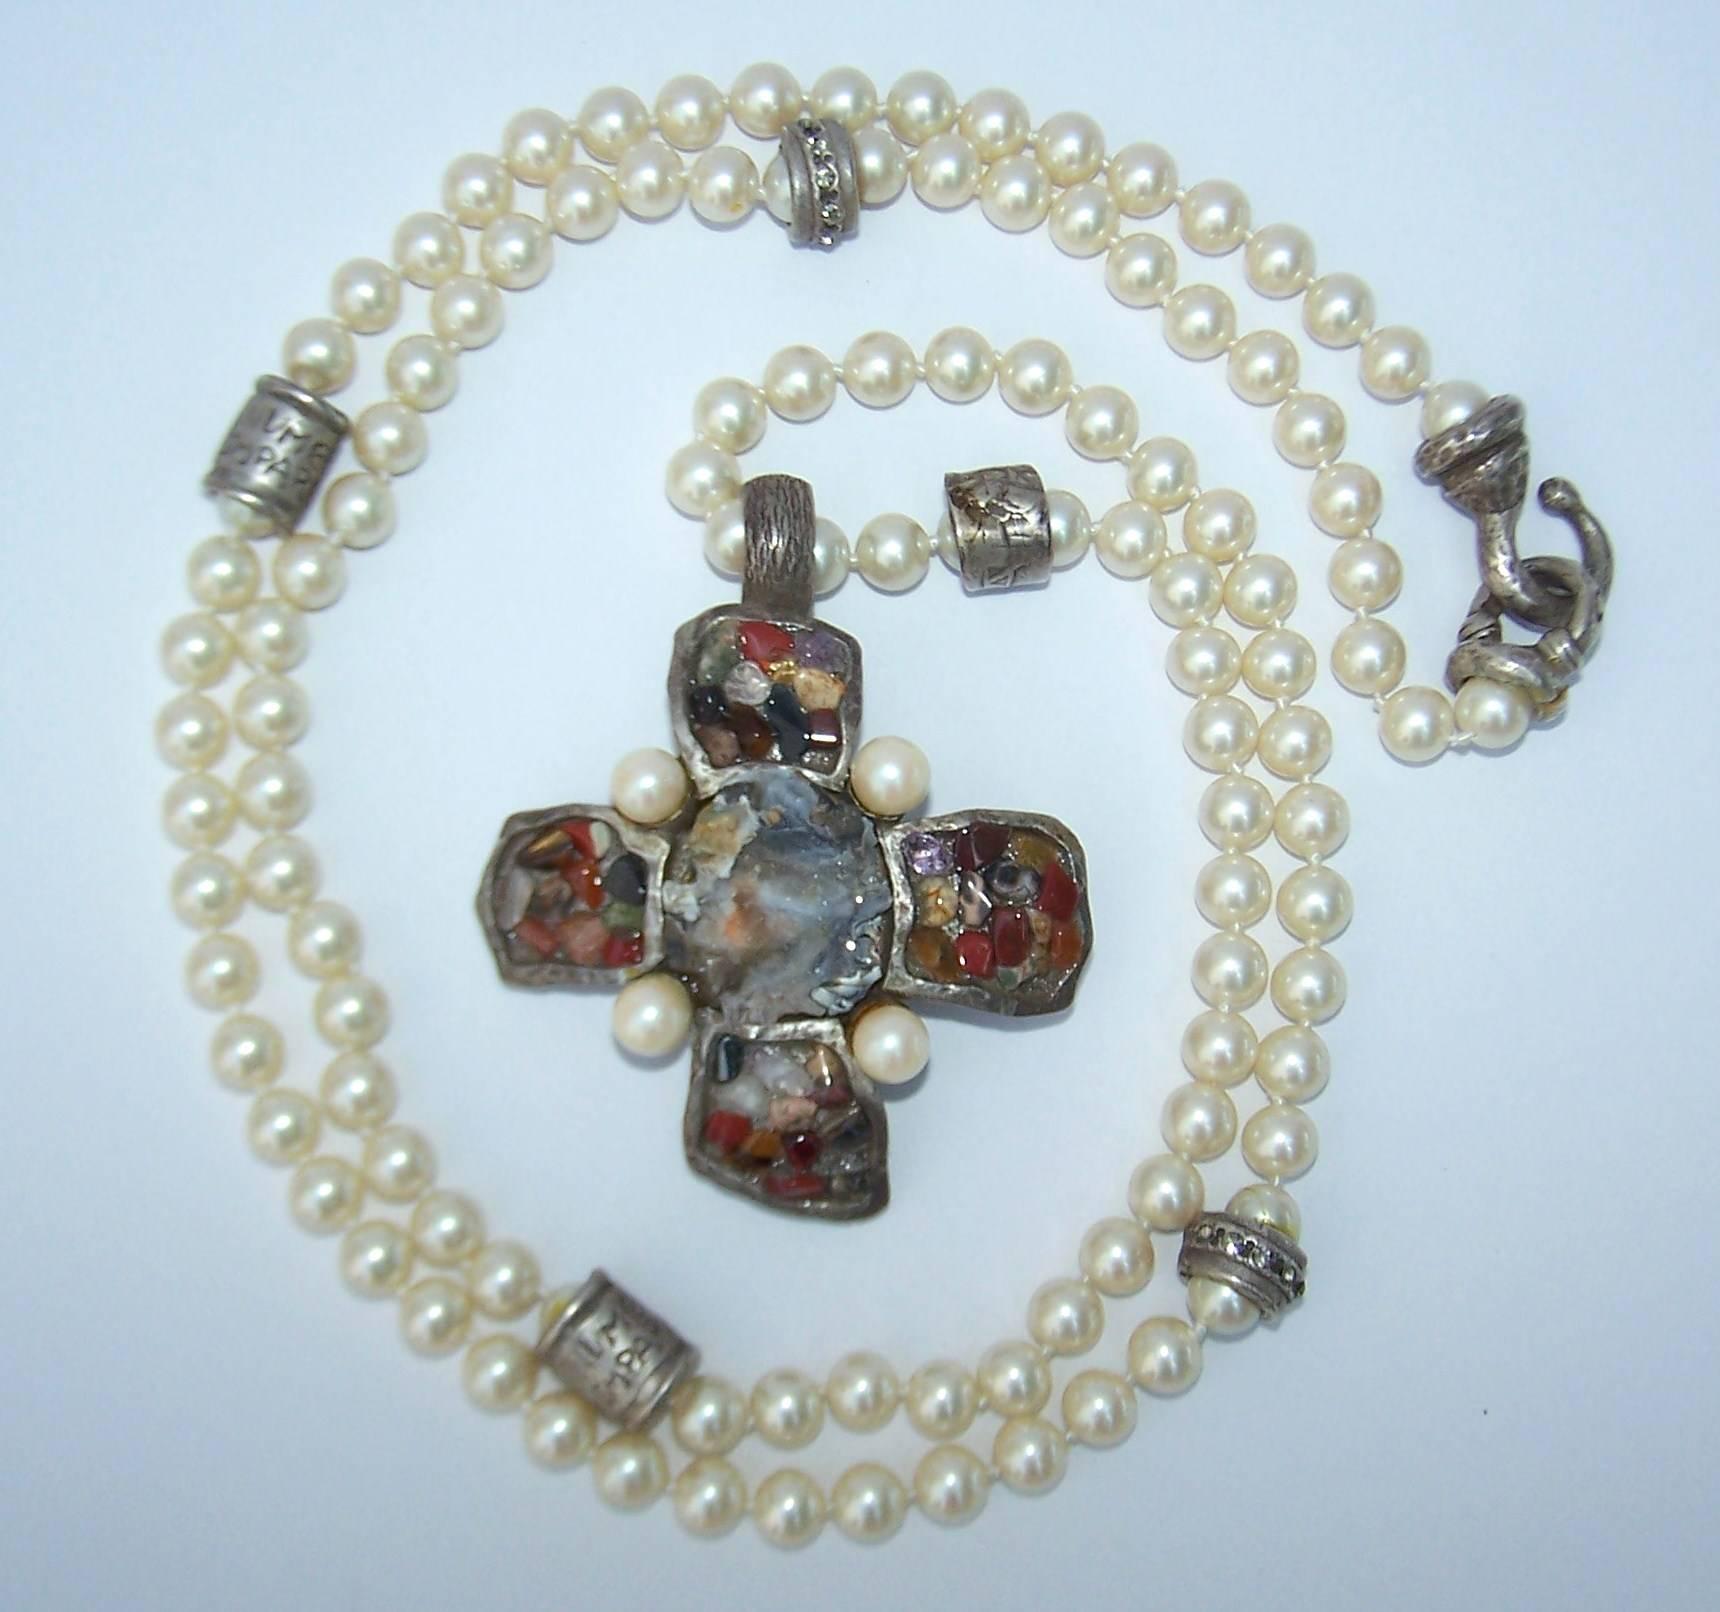 Brutalism and elegance are expertly mixed in this opera length faux pearl necklace by Gerard Yosca from the 1980's.  Mr. Yosca is know for his artisan jewelry and continues to design beautiful pieces today.  This necklace measures 42